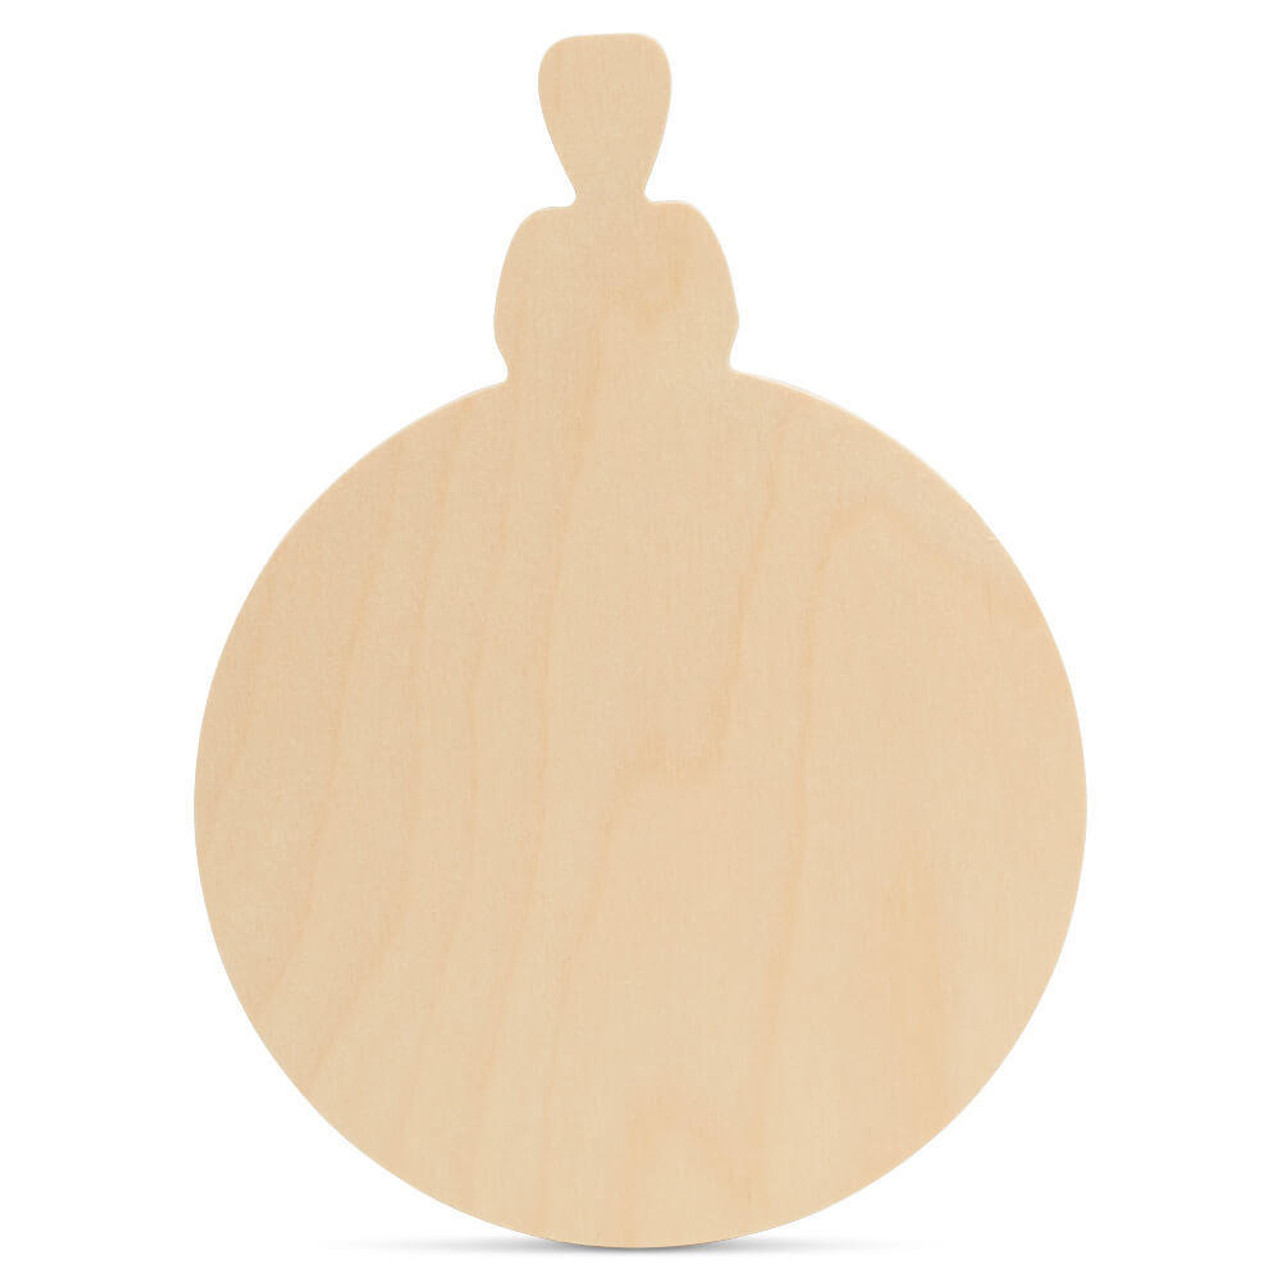 Wooden Christmas Ornament ShapeCutout Extra-Large 18L x 13.2W